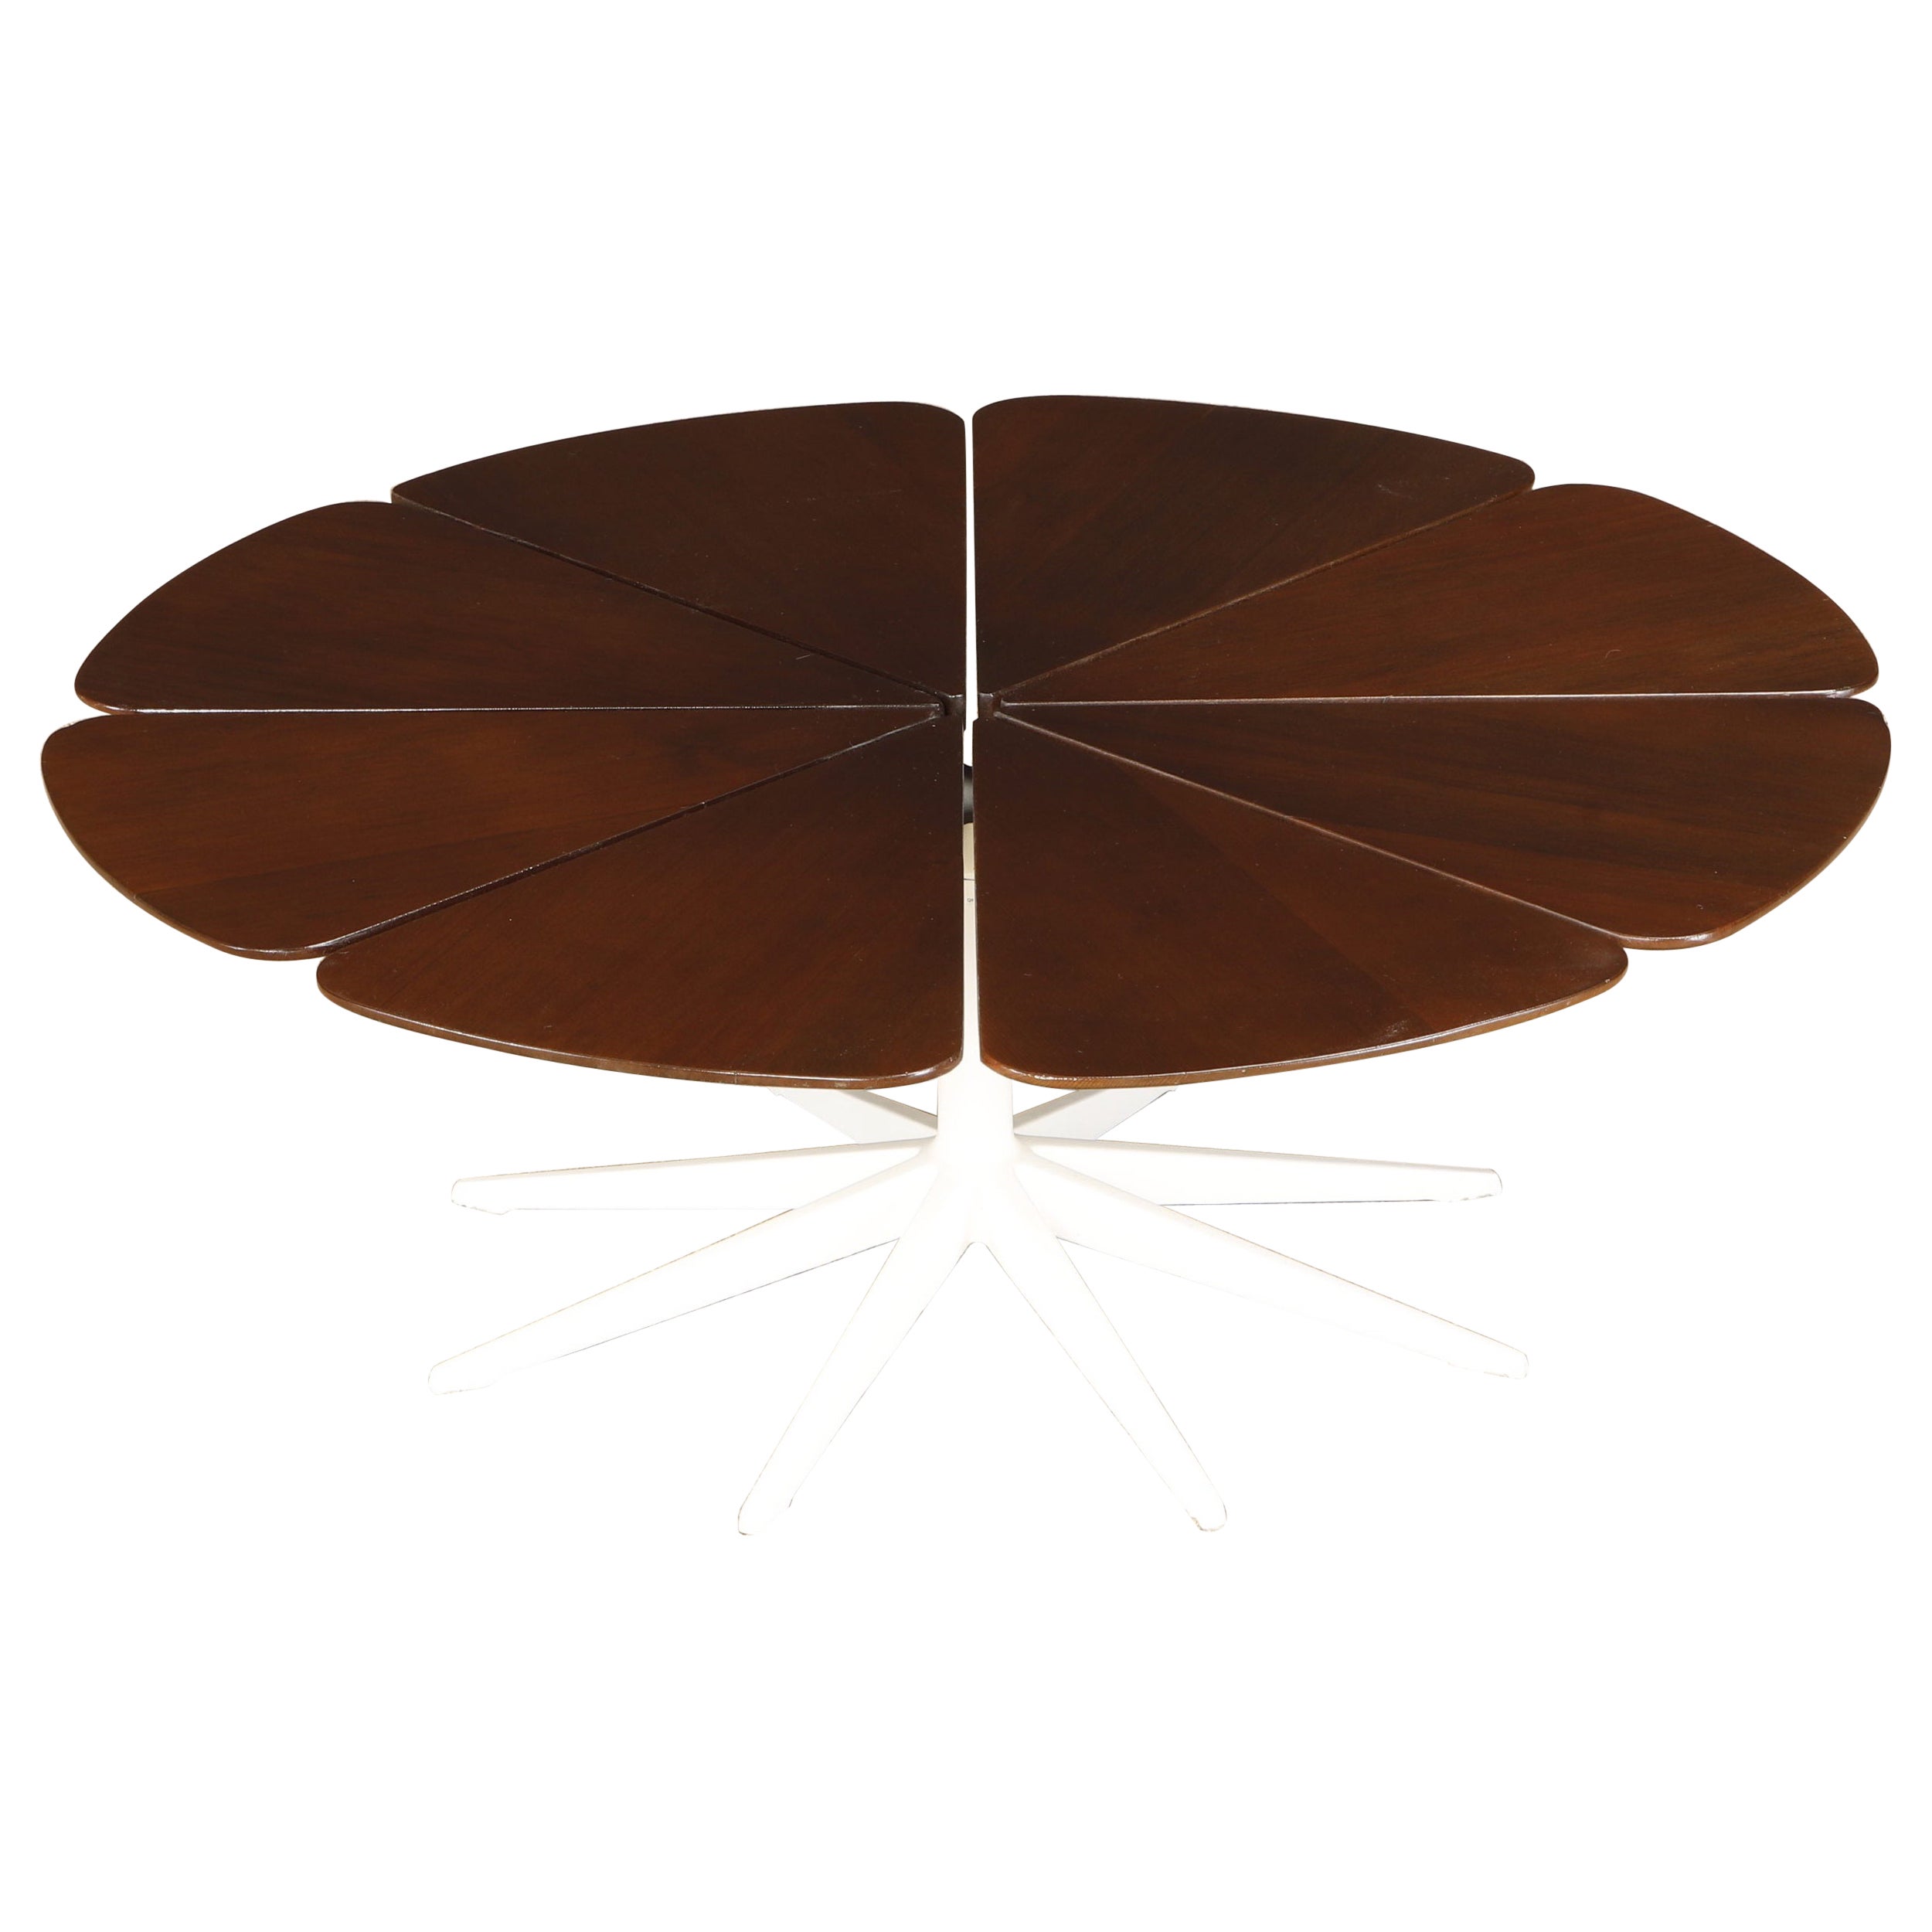 'Petal' Coffee Table by Richard Schultz for Knoll Associates, 1960s, Signed For Sale